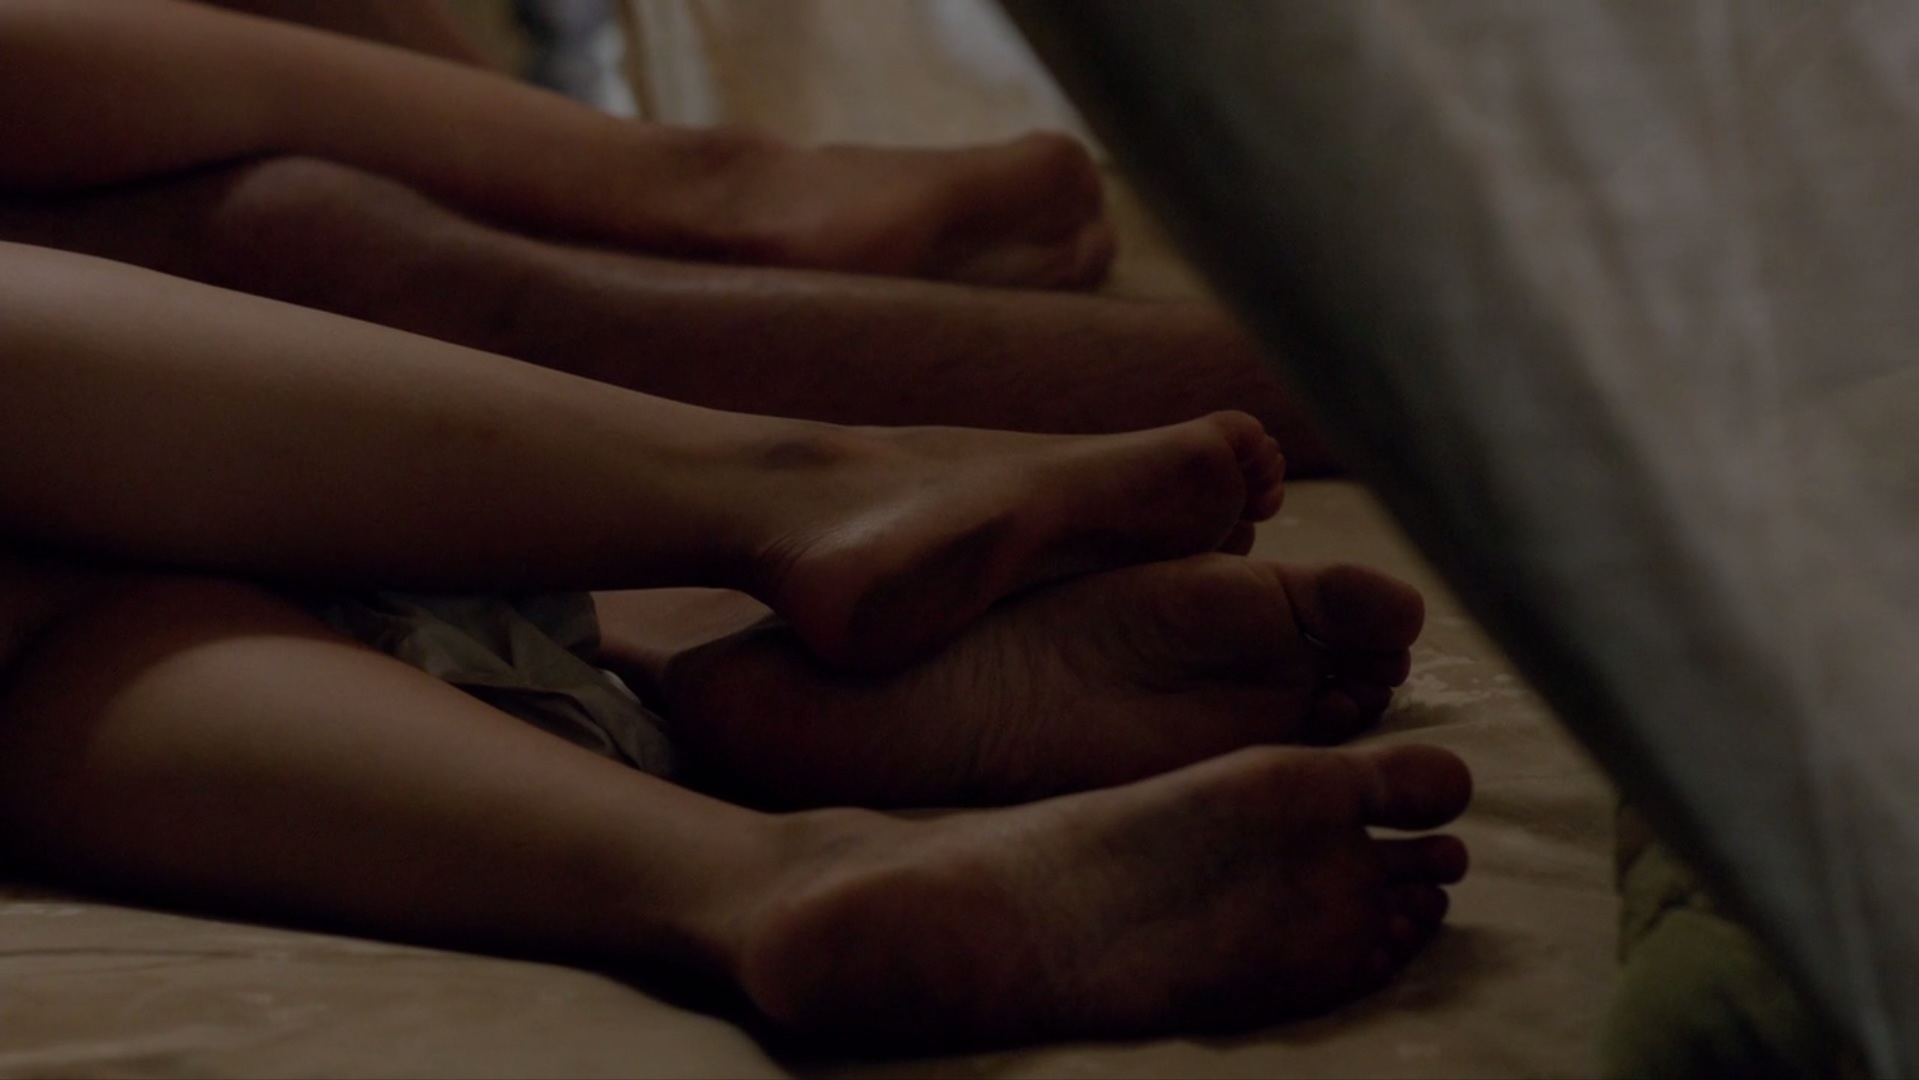 People who liked Jessica Parker Kennedy's feet, also liked.